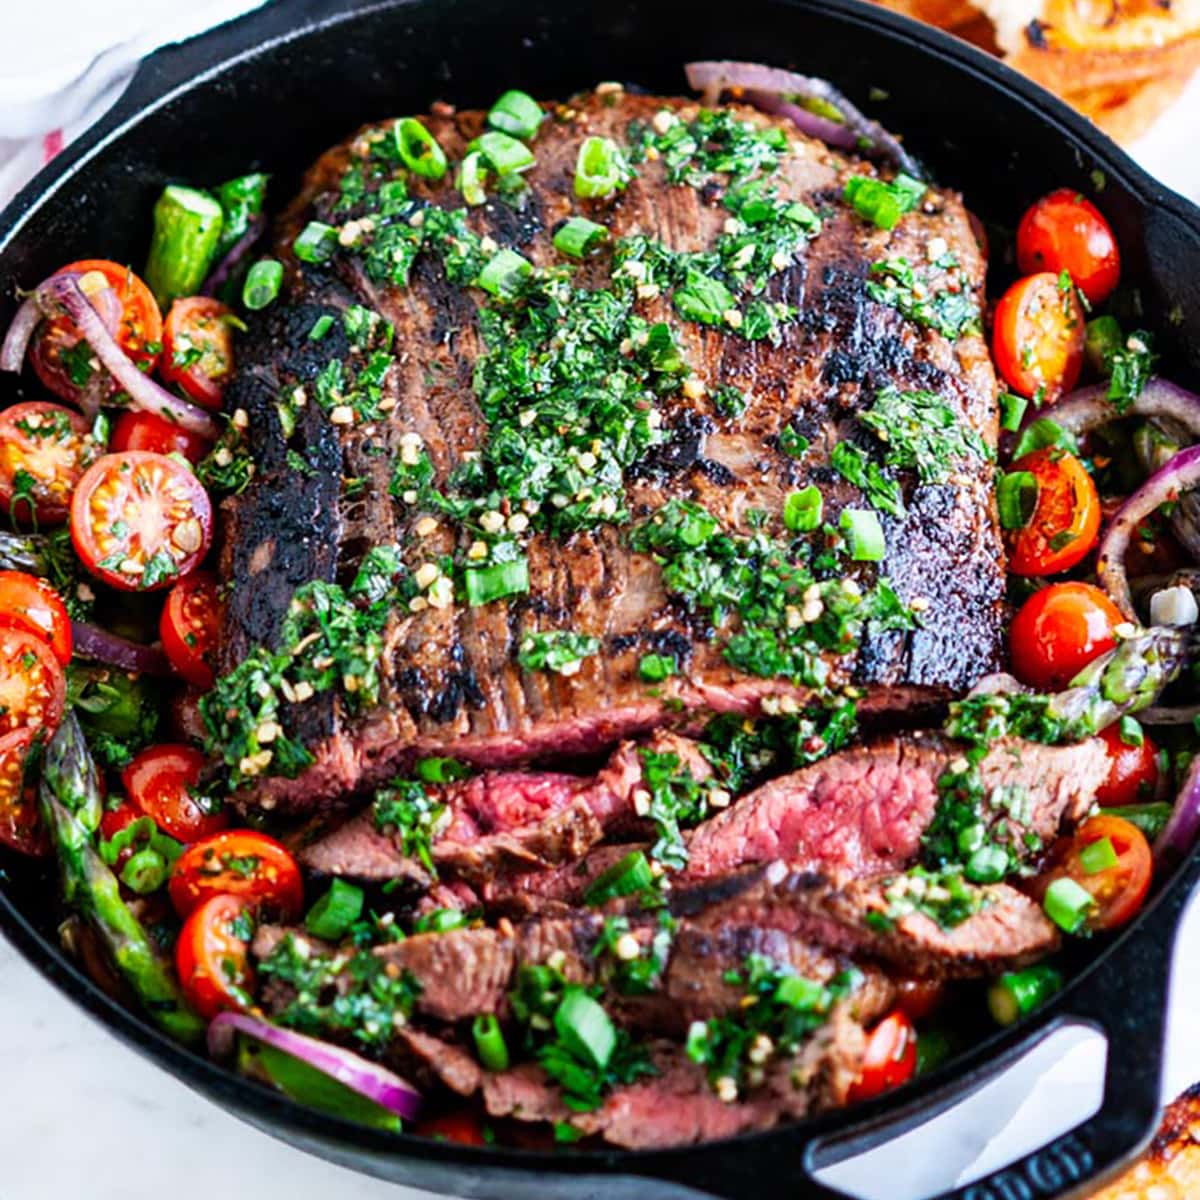 How To Cook A Steak In A Cast Iron Skillet - The Clean Eating Couple